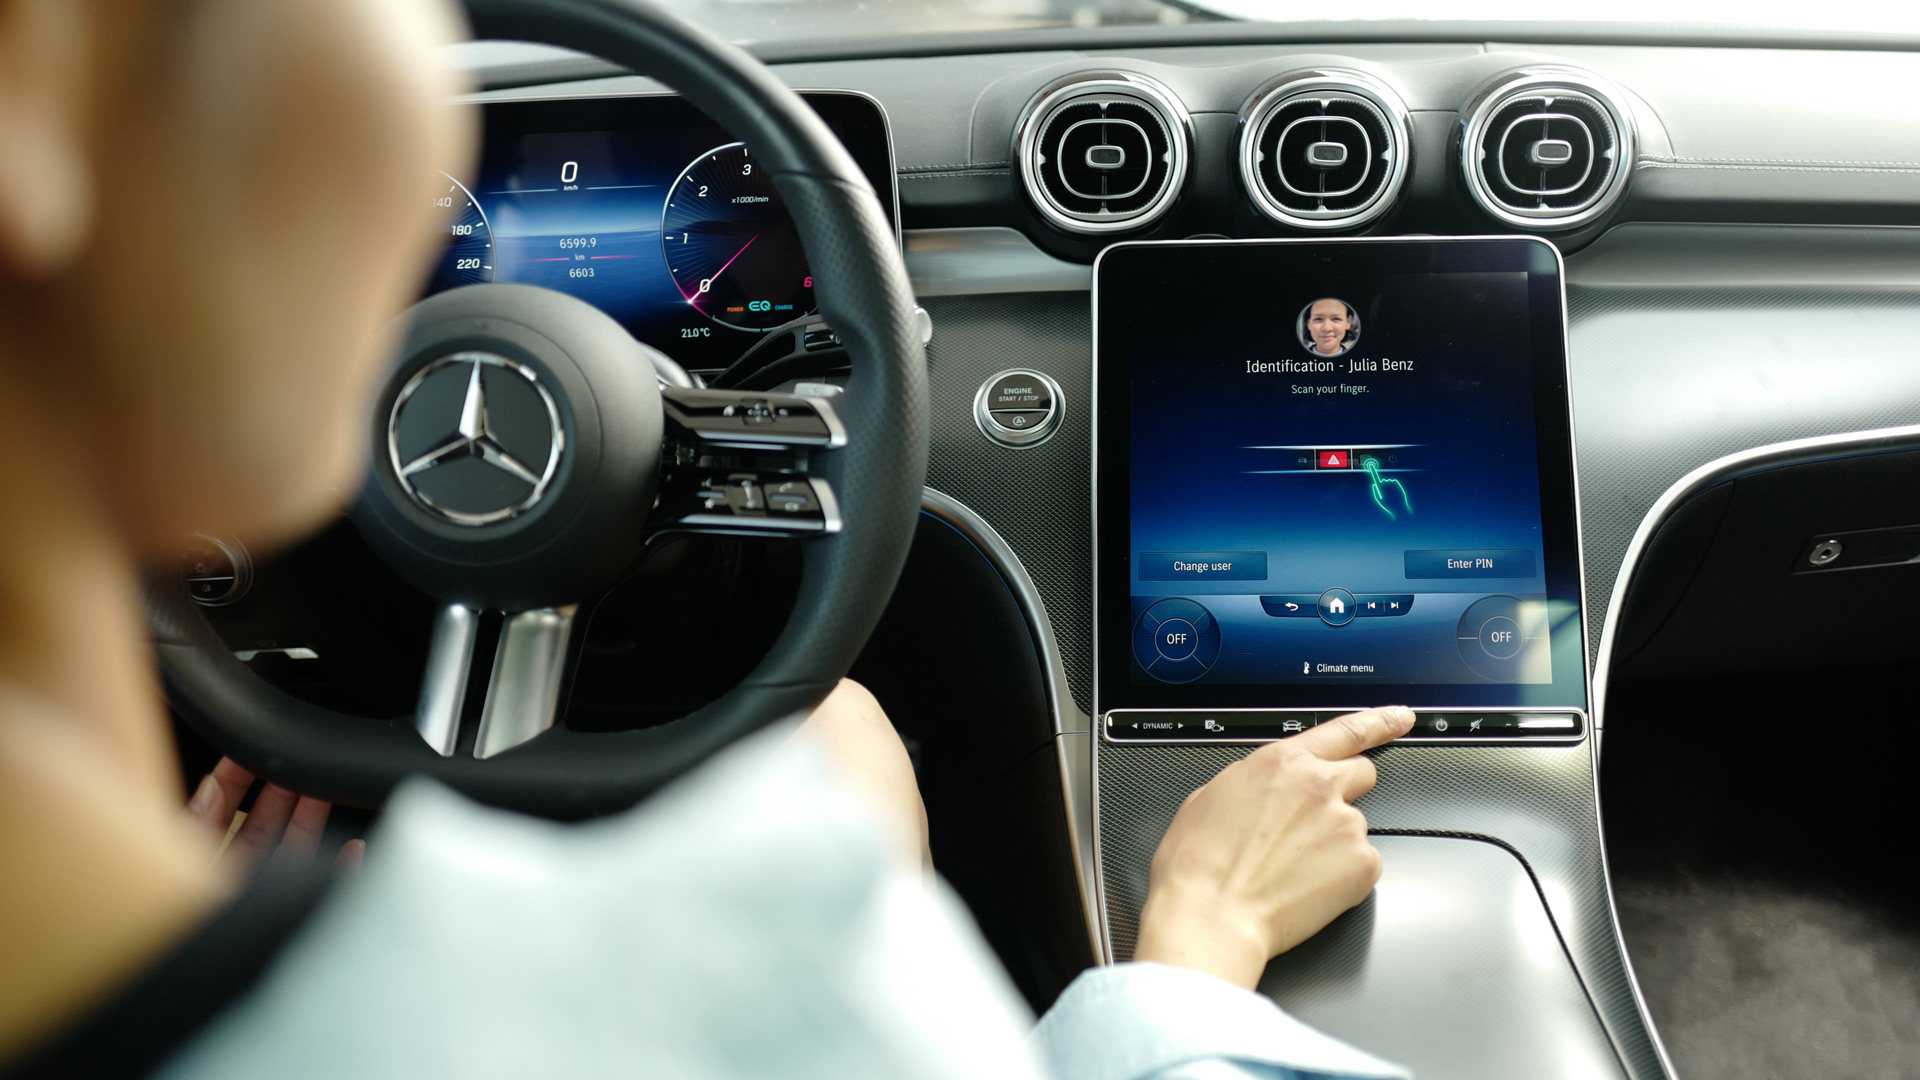 Make funds out of your Mercedes with only a fingerprint